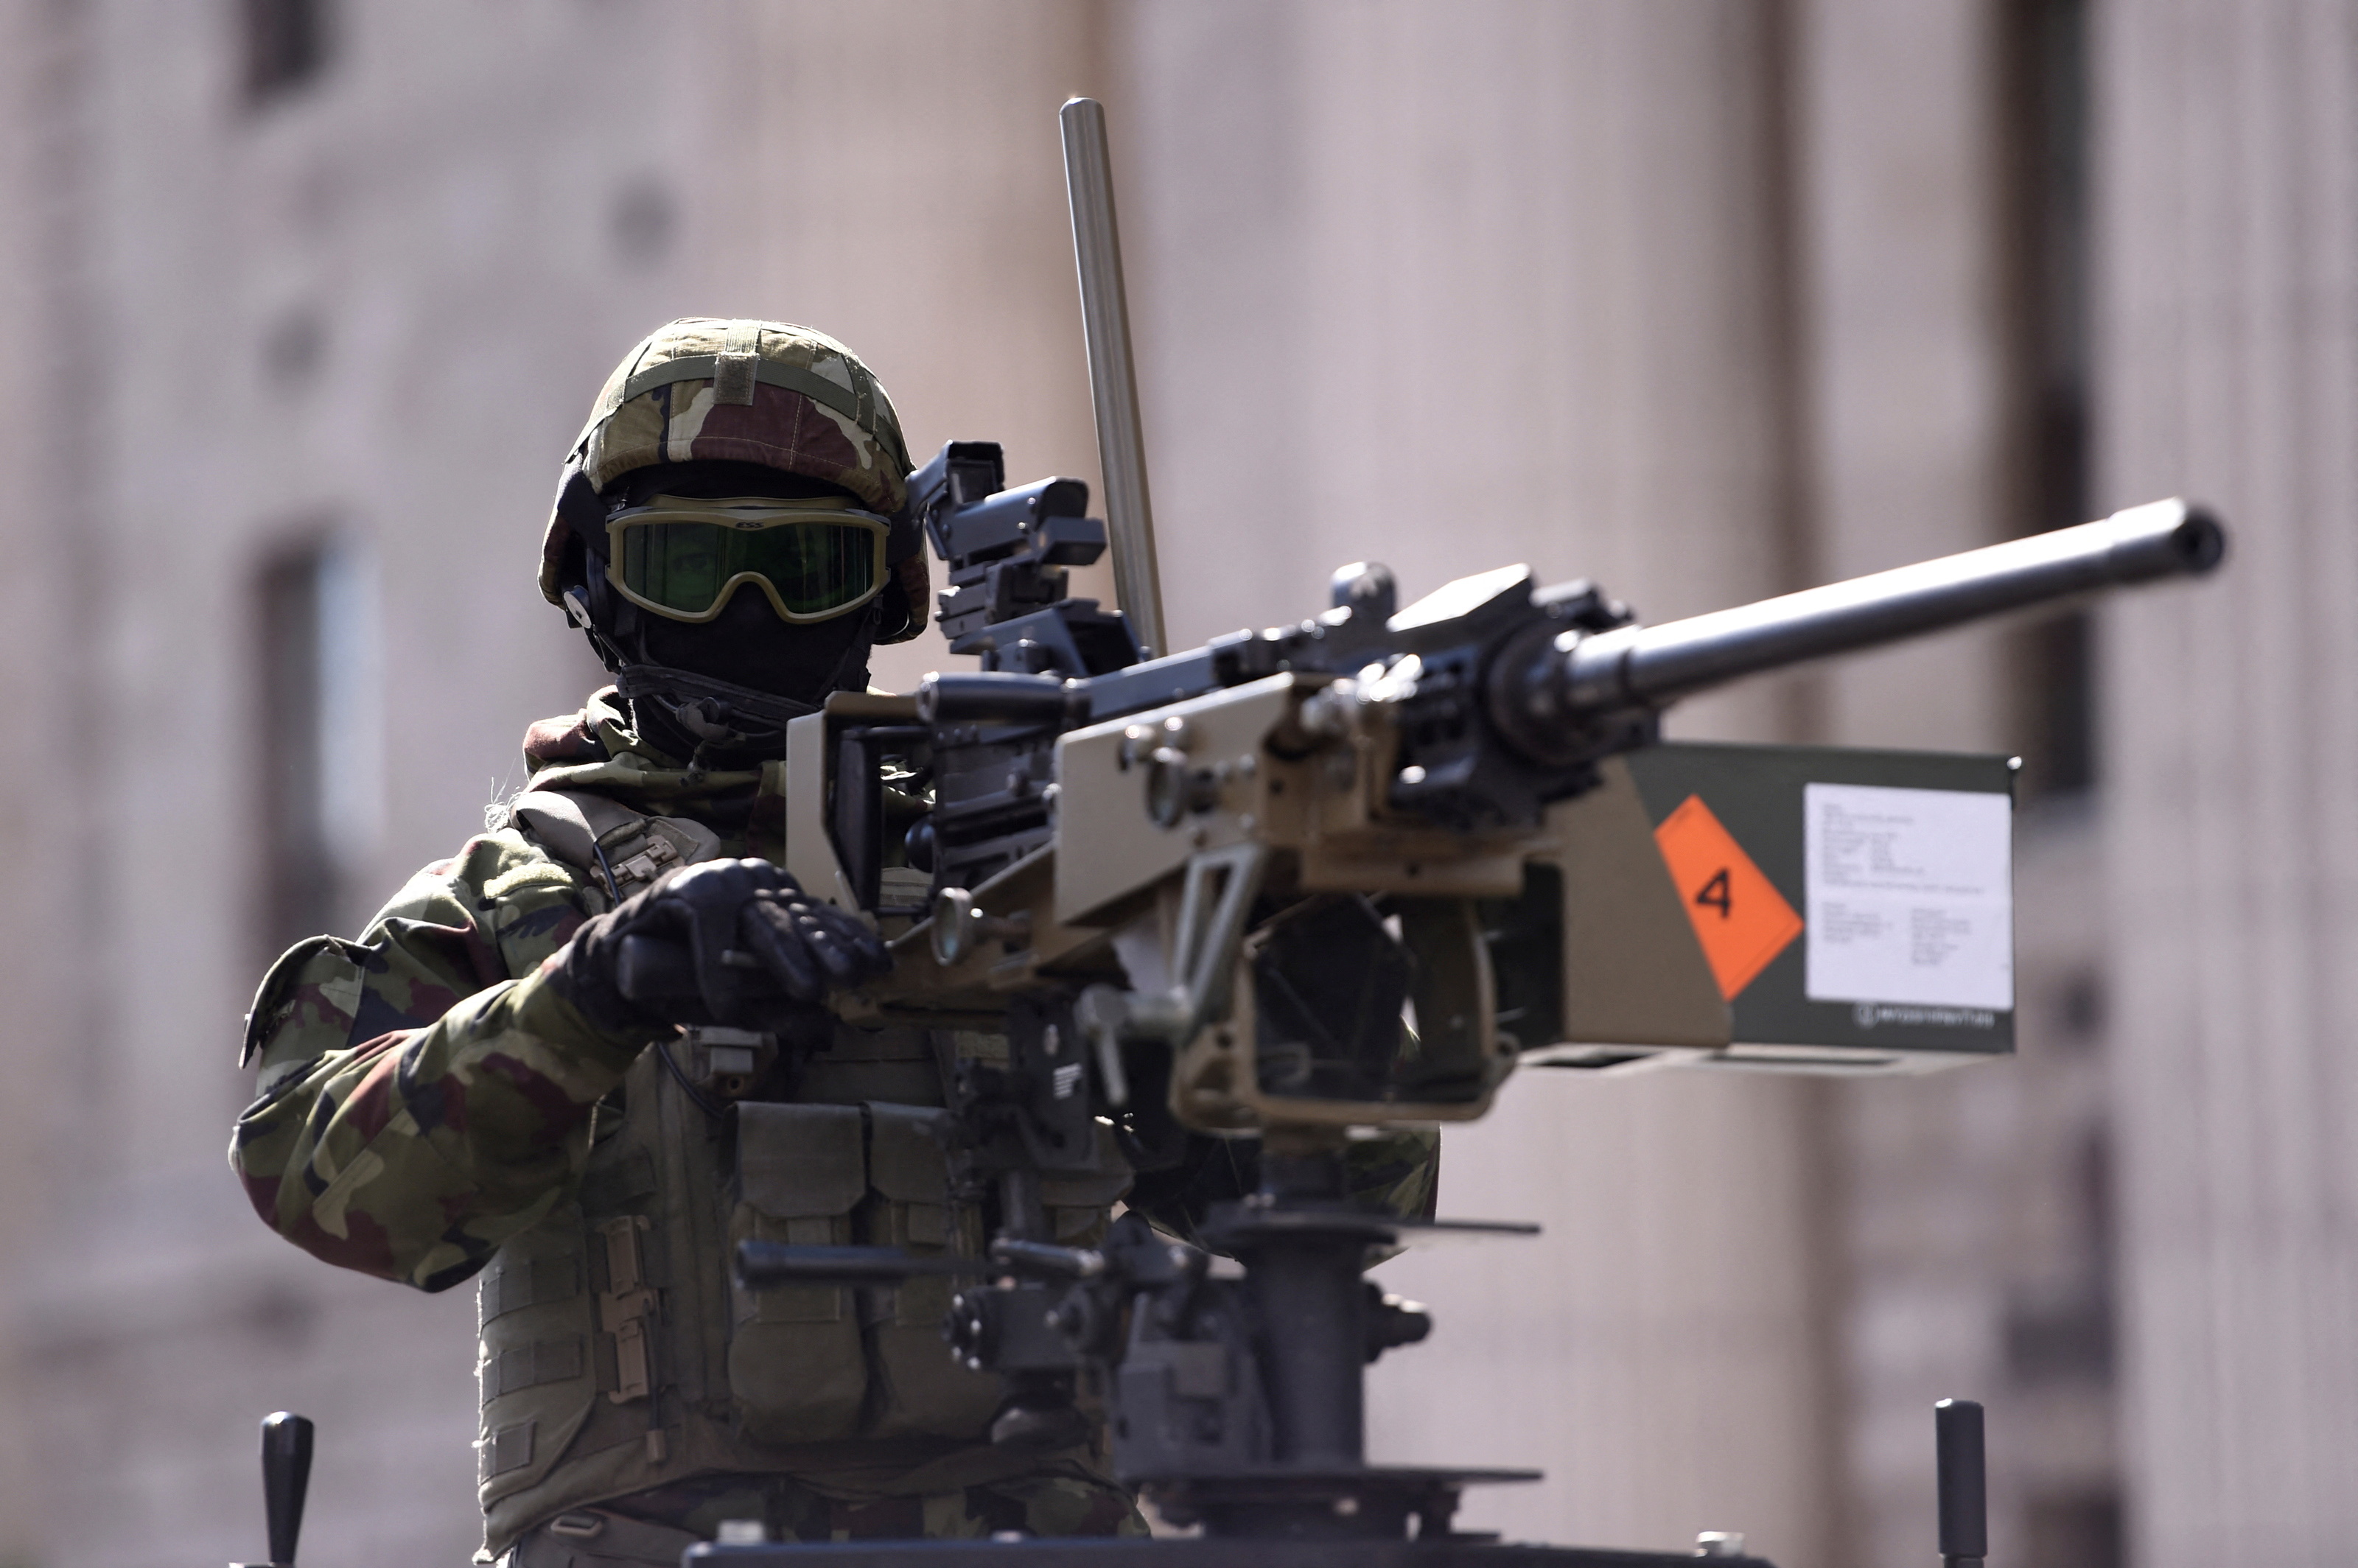 A member of the Irish Defence Force with a machine gun takes part in a parade during the commemoration of the 100 year anniversary of the Irish Easter Rising in Dublin